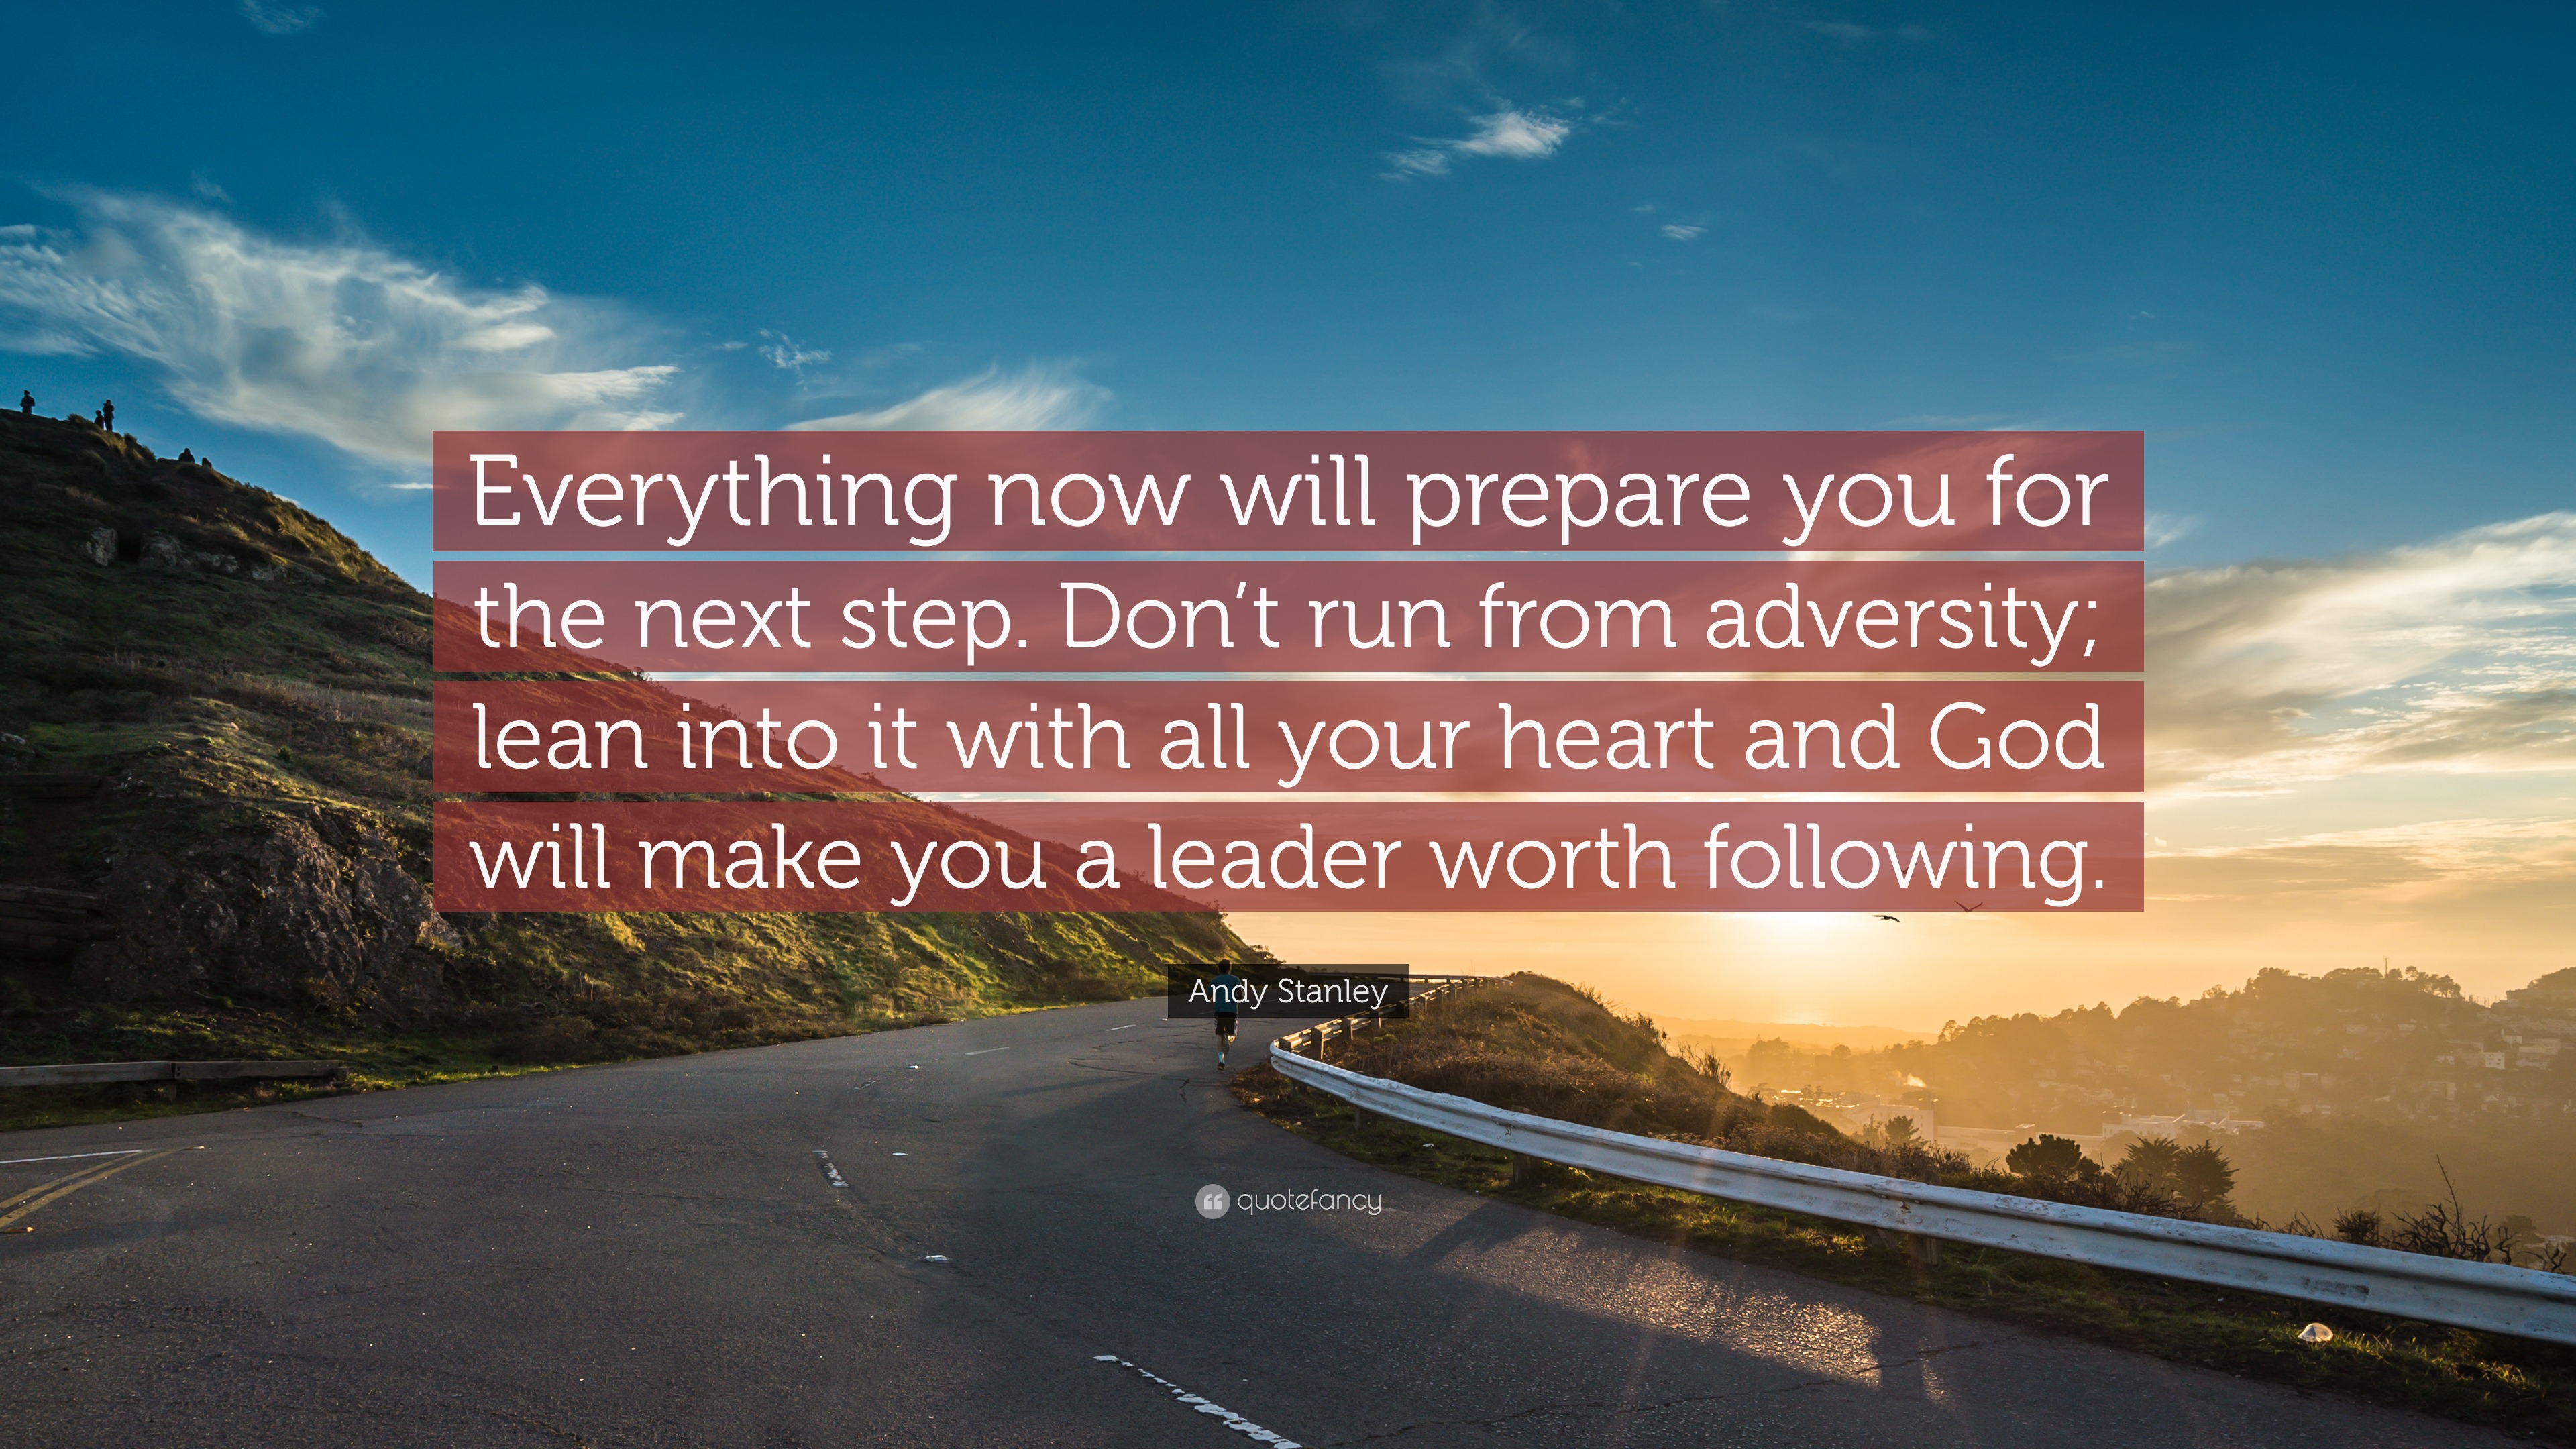 Andy Stanley Quote: “Everything now will prepare you for the next step ...